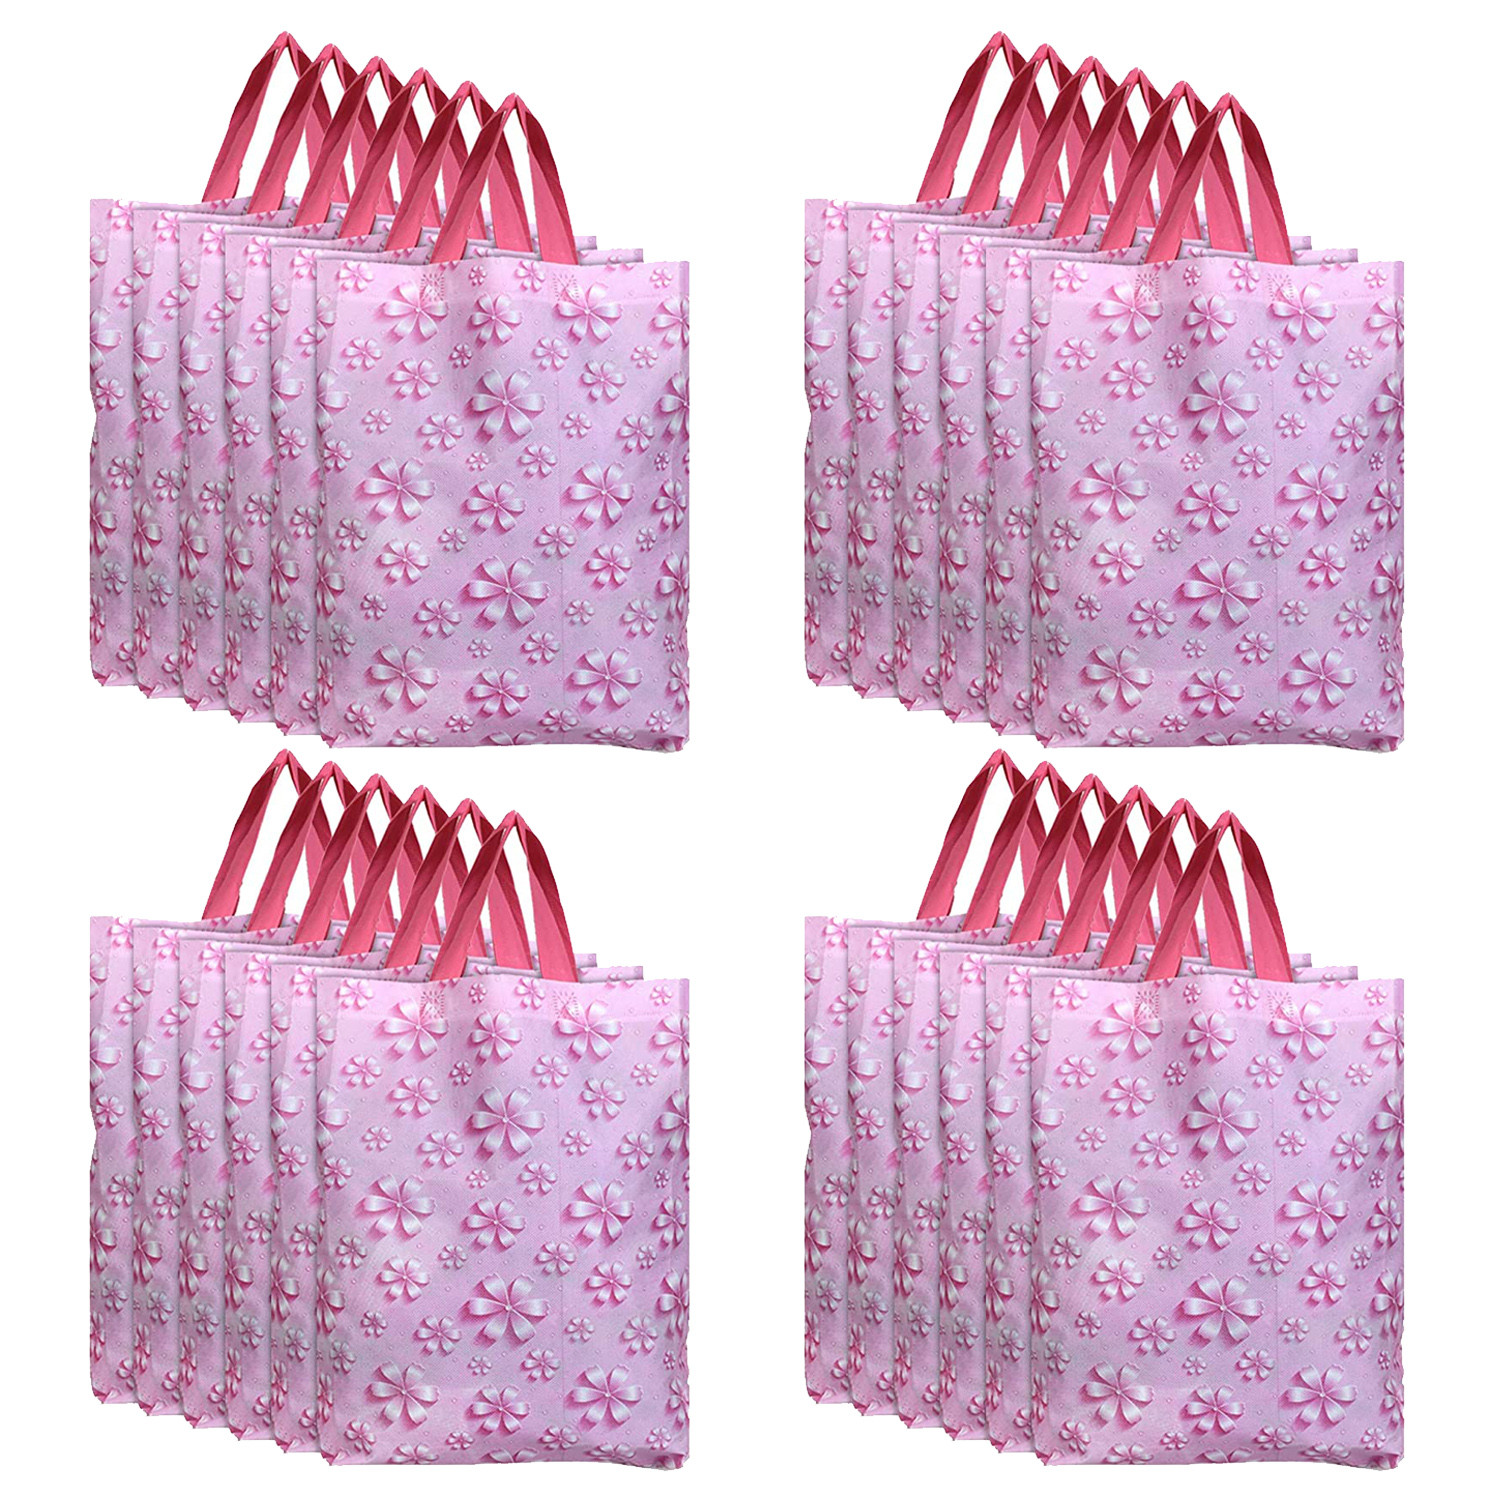 Kuber Industries Gift Bag|Non Woven Shopping Bag With Handle|Flower Pattern Reusable Grocery Stylish Handbag|Large(Pink)